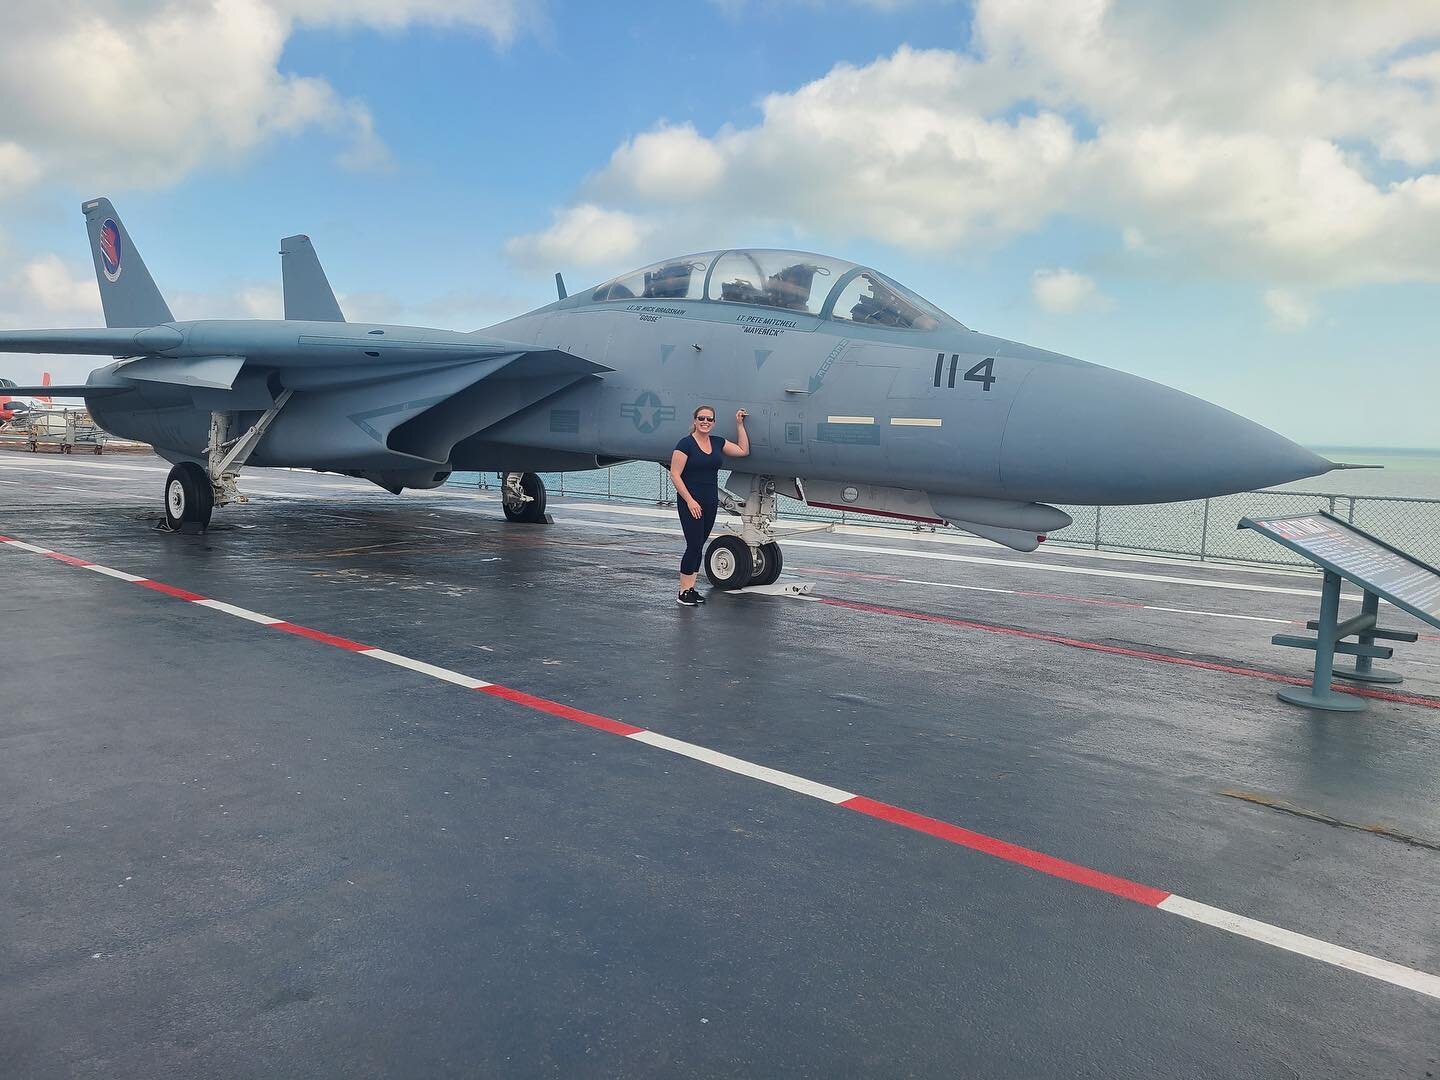 Lunch time regular Brianna has been down in Texas for a great work opportunity the past little while! (She flies helicopters for a living!)
She sent us this super cool pic beside the F14 from Top Gun, and will be back in the lunch crew soon!
I get su